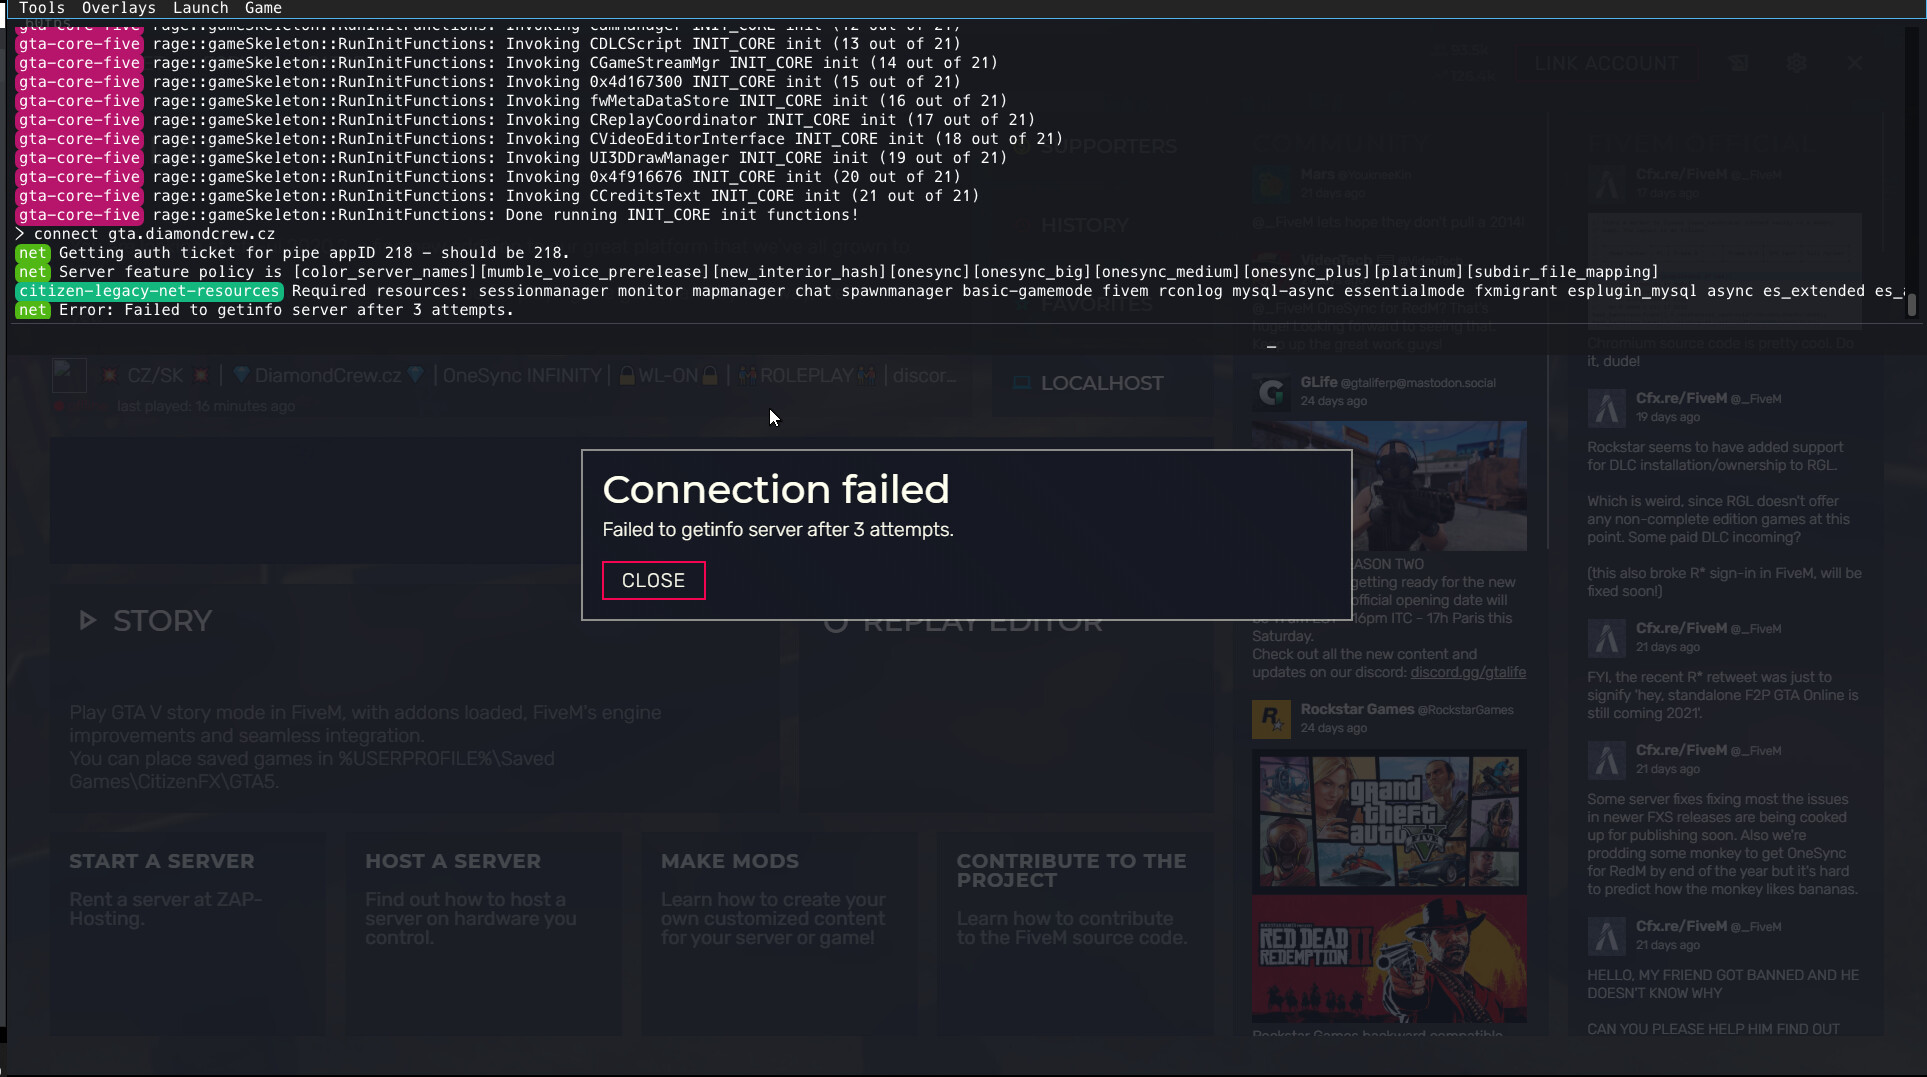 Connecting failed steam фото 69